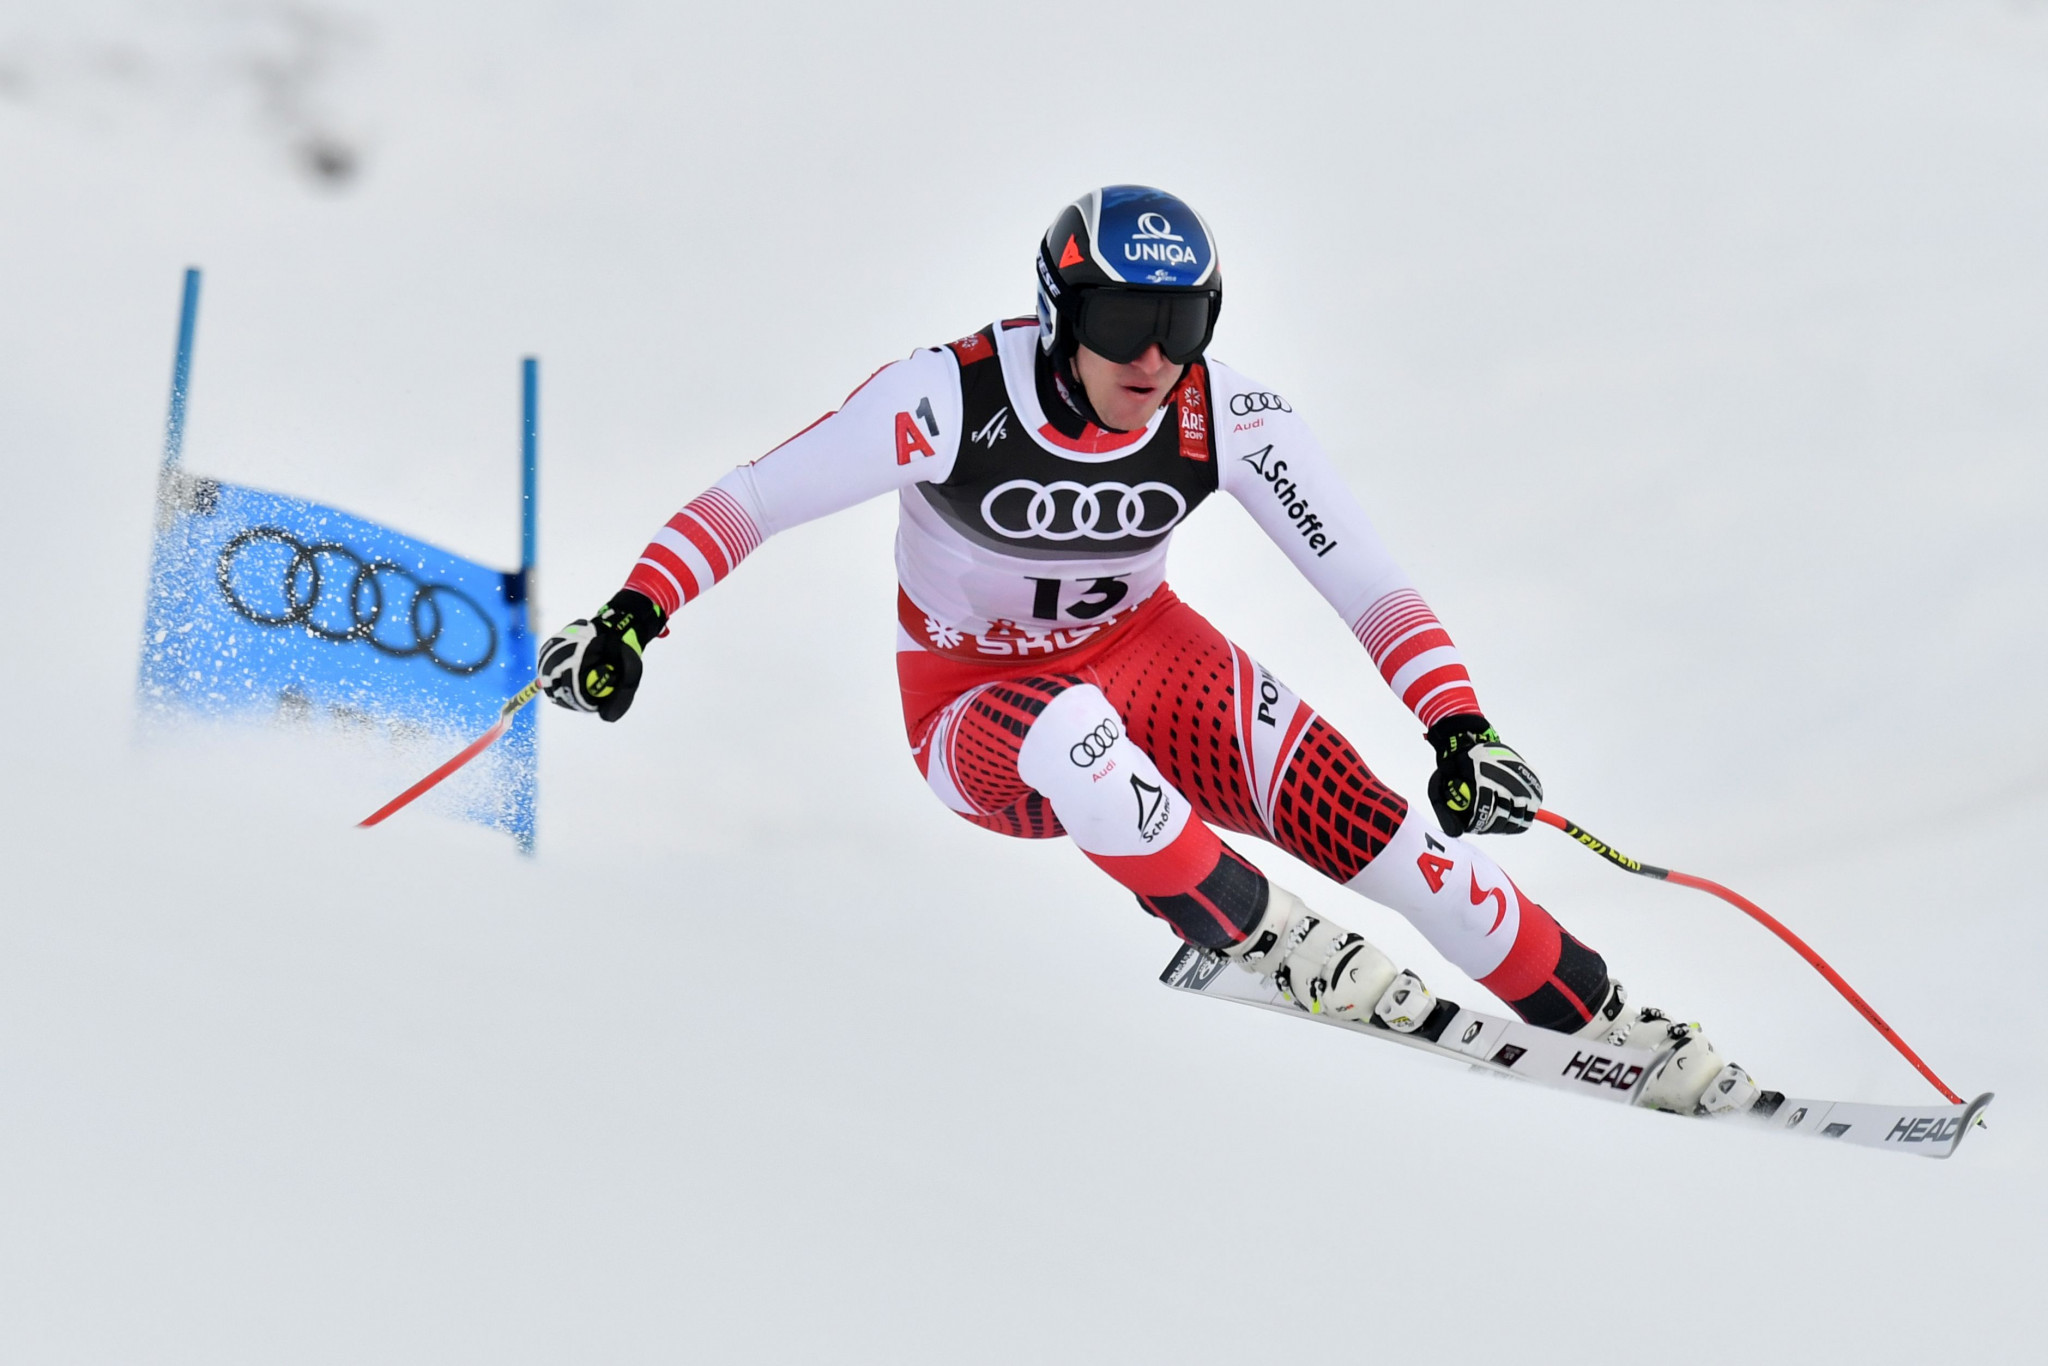 Olympic champion Matthias Mayer failed to finish after misjudging his line on a jump and missing a gate ©Getty Images